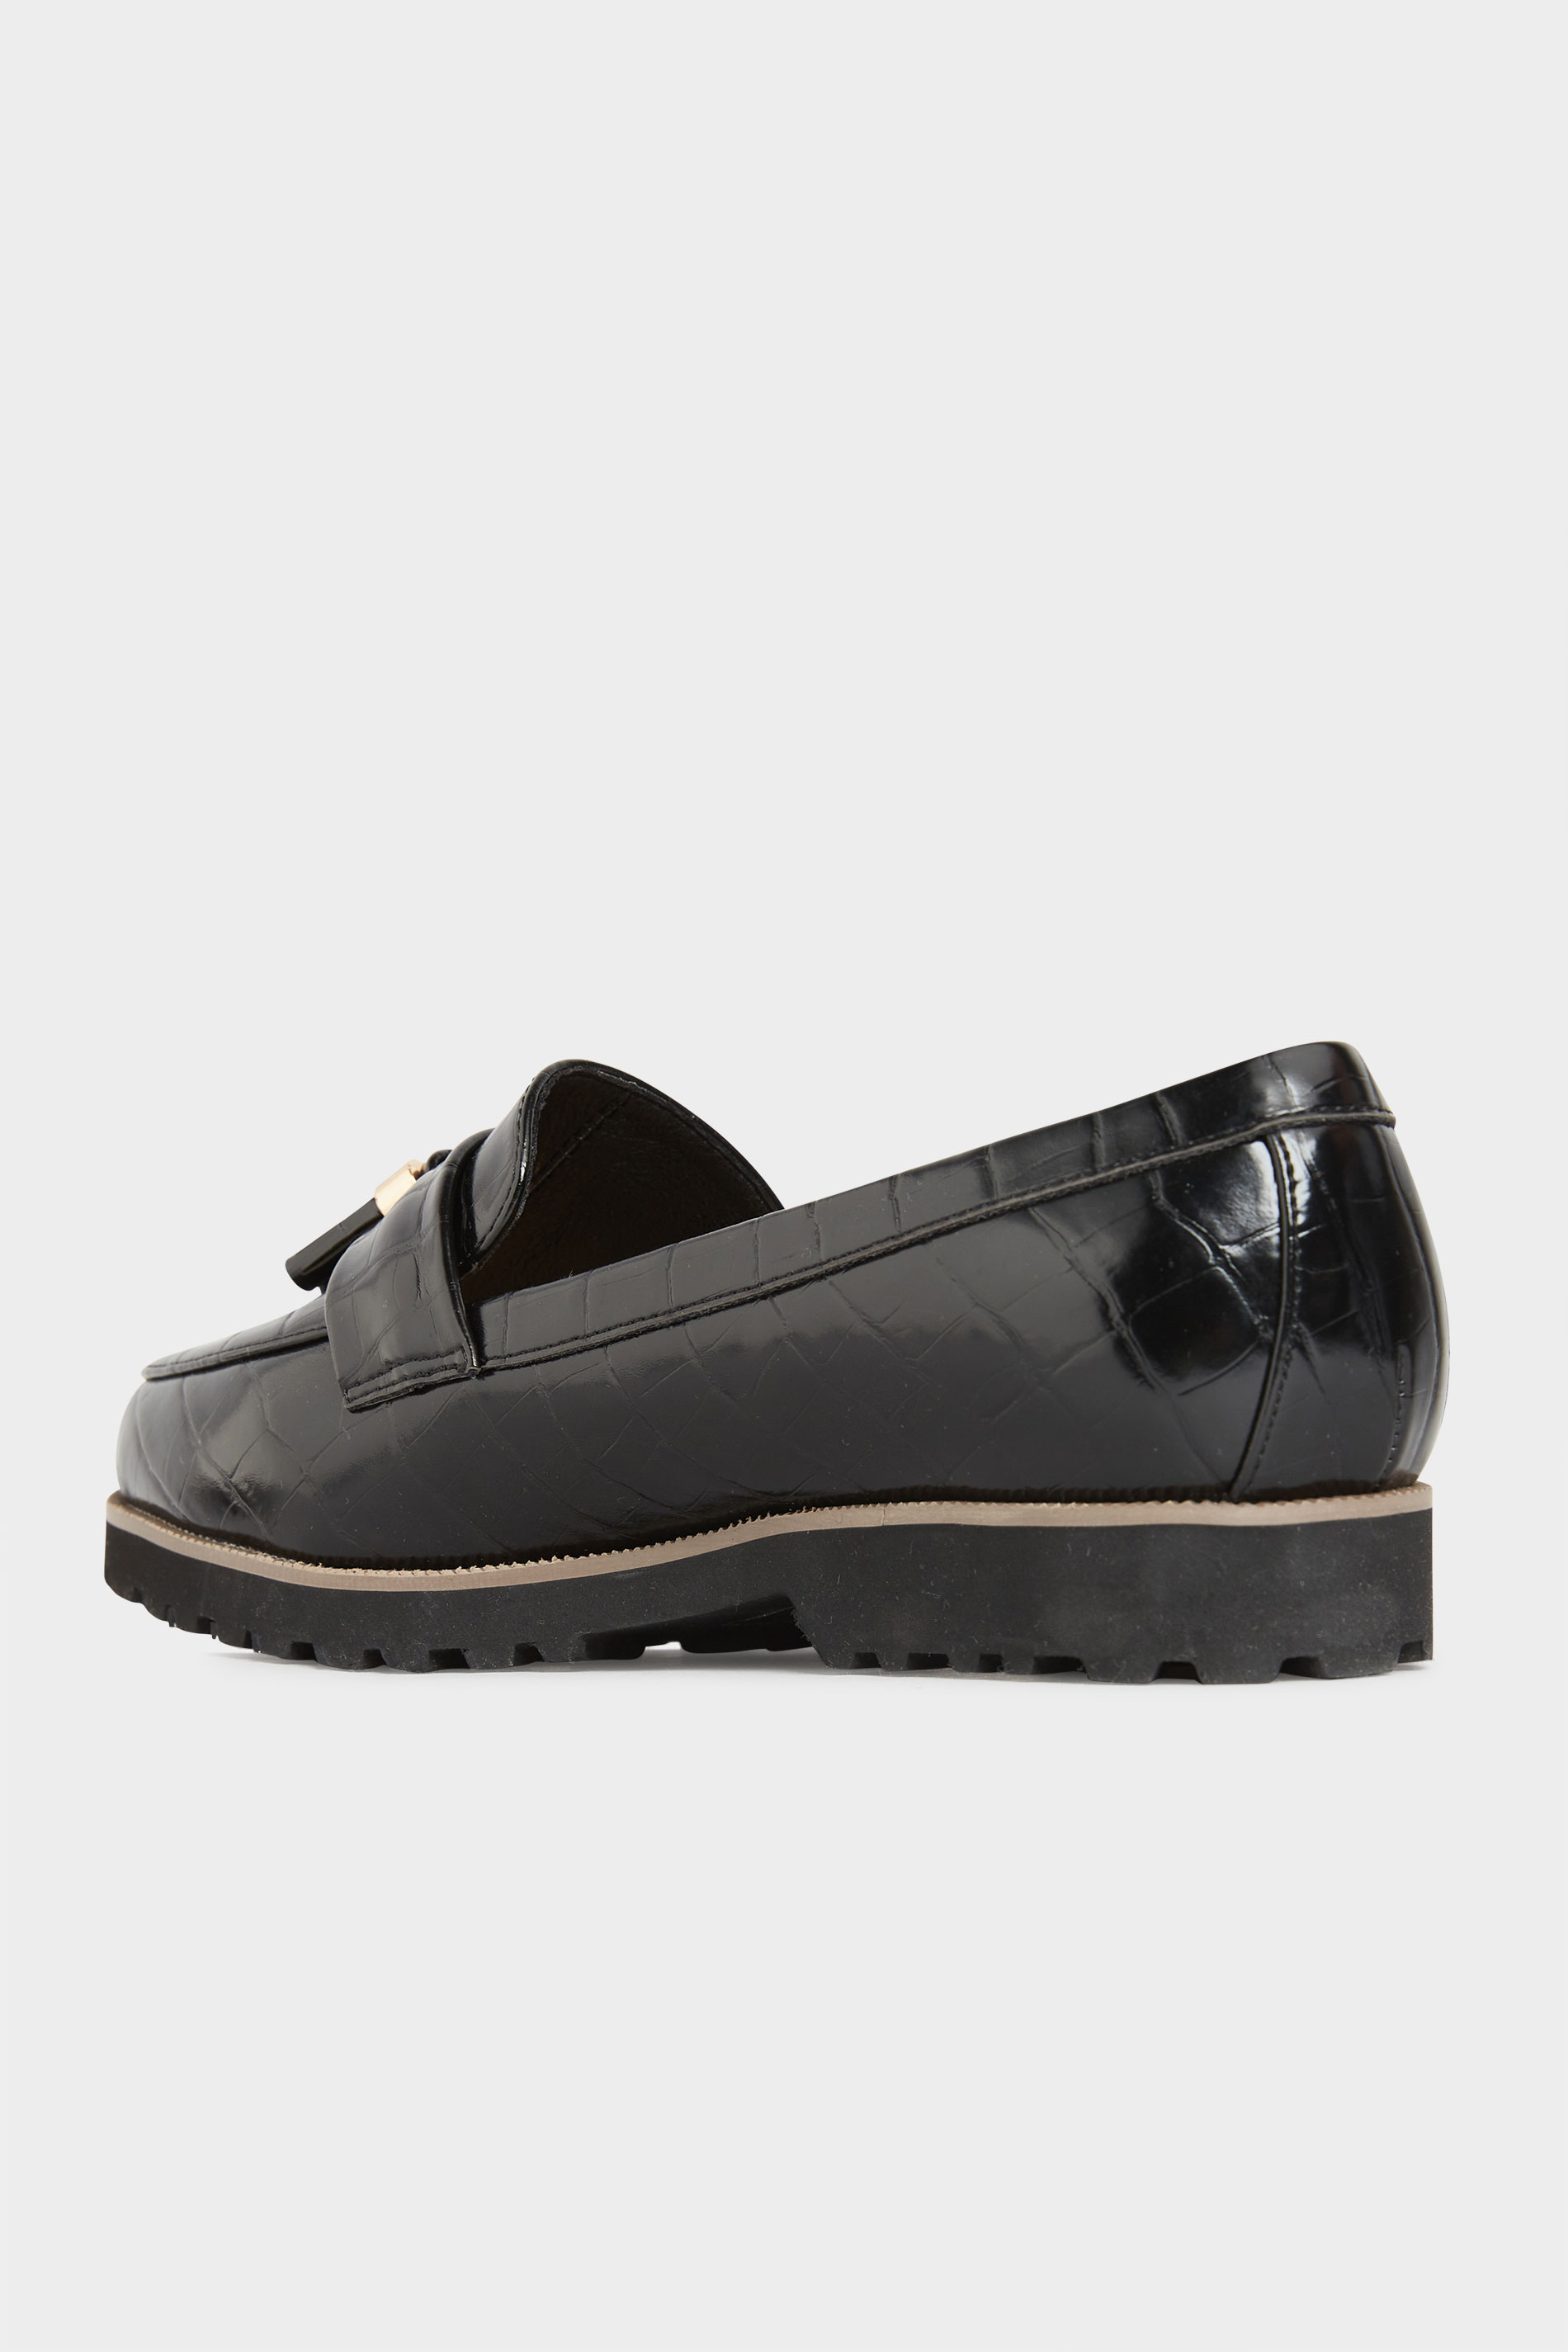 LIMITED COLLECTION Black Croc Tassel Loafers In Extra Wide Fit | Yours ...